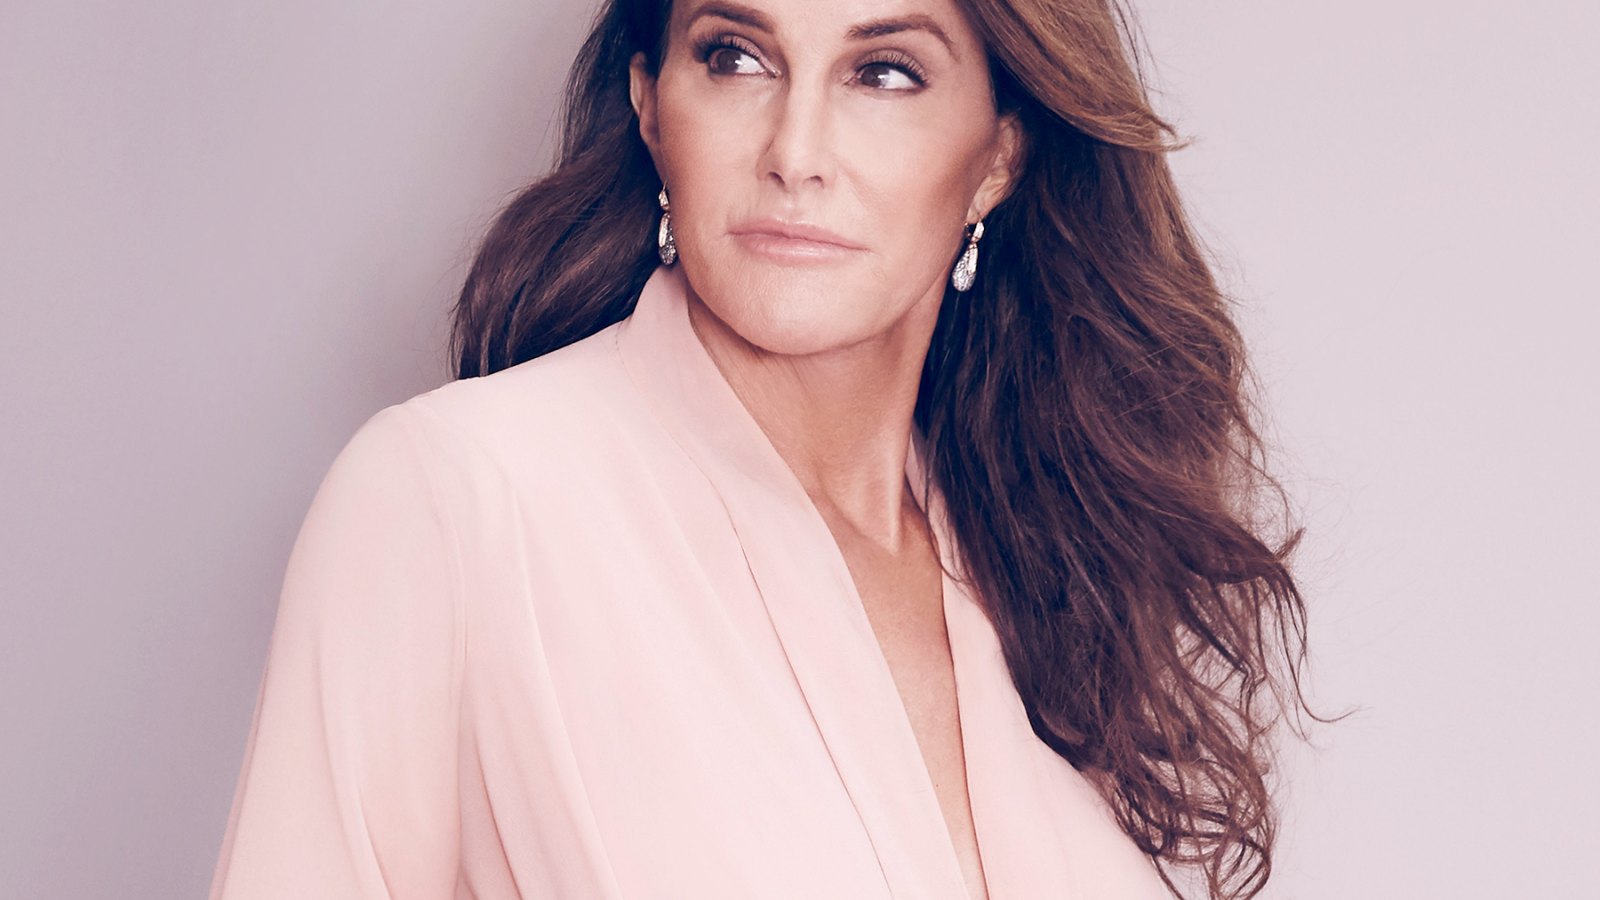 I Am Cait: Top 5 Standout Moments Revealed Including Caitlyn's Friends